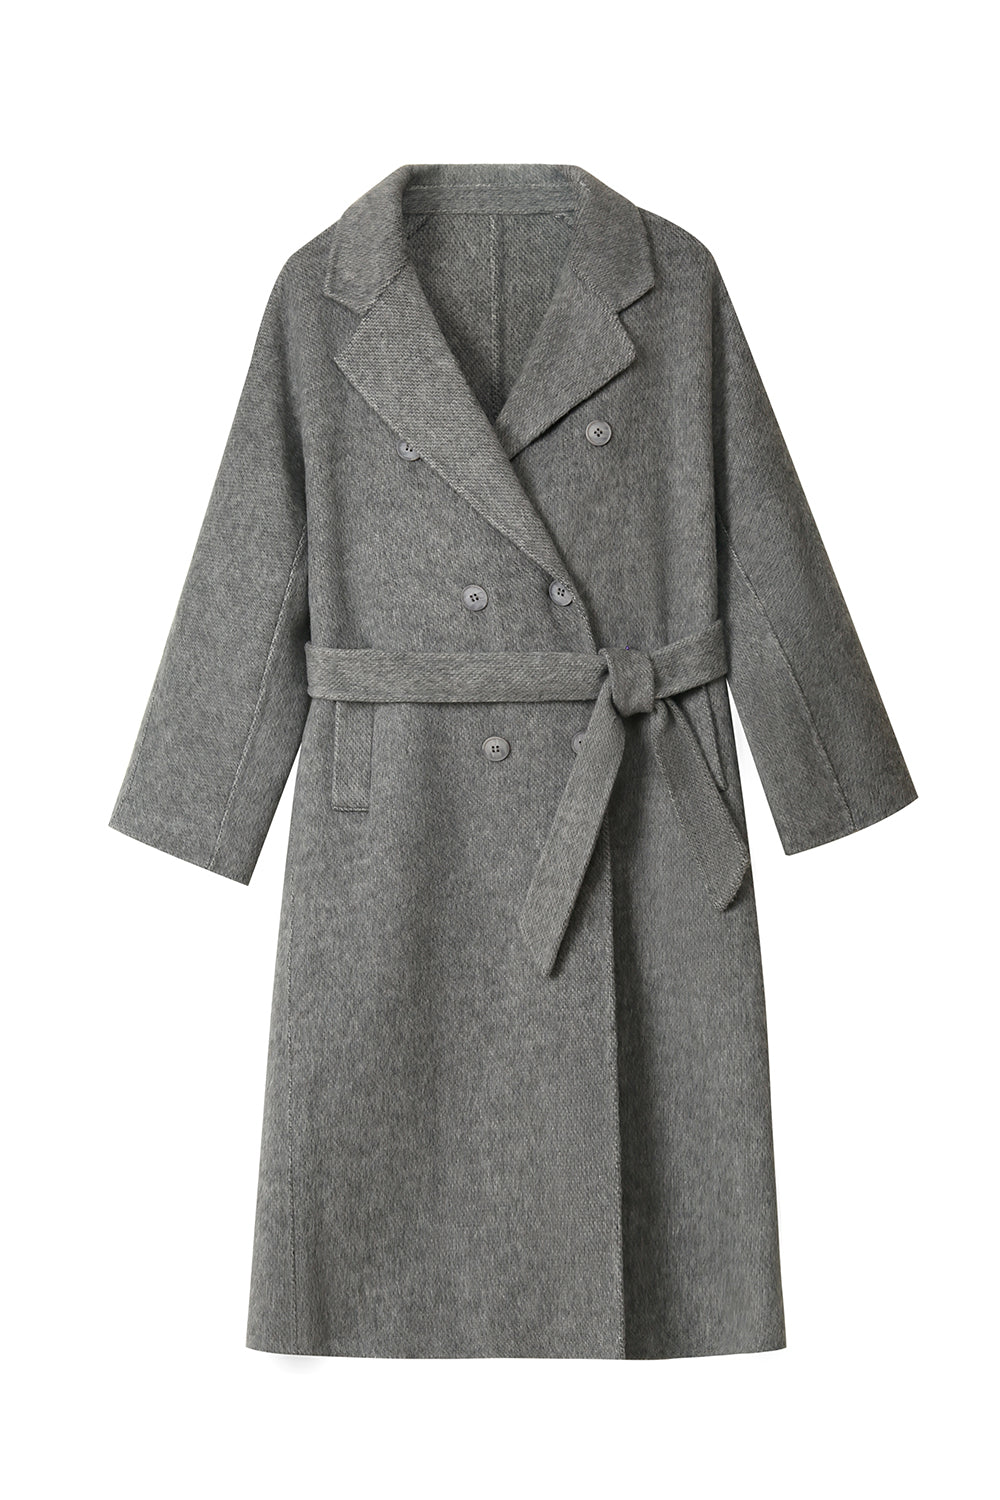 Grey Double Breasted Long Wool Blend Coat with Belt